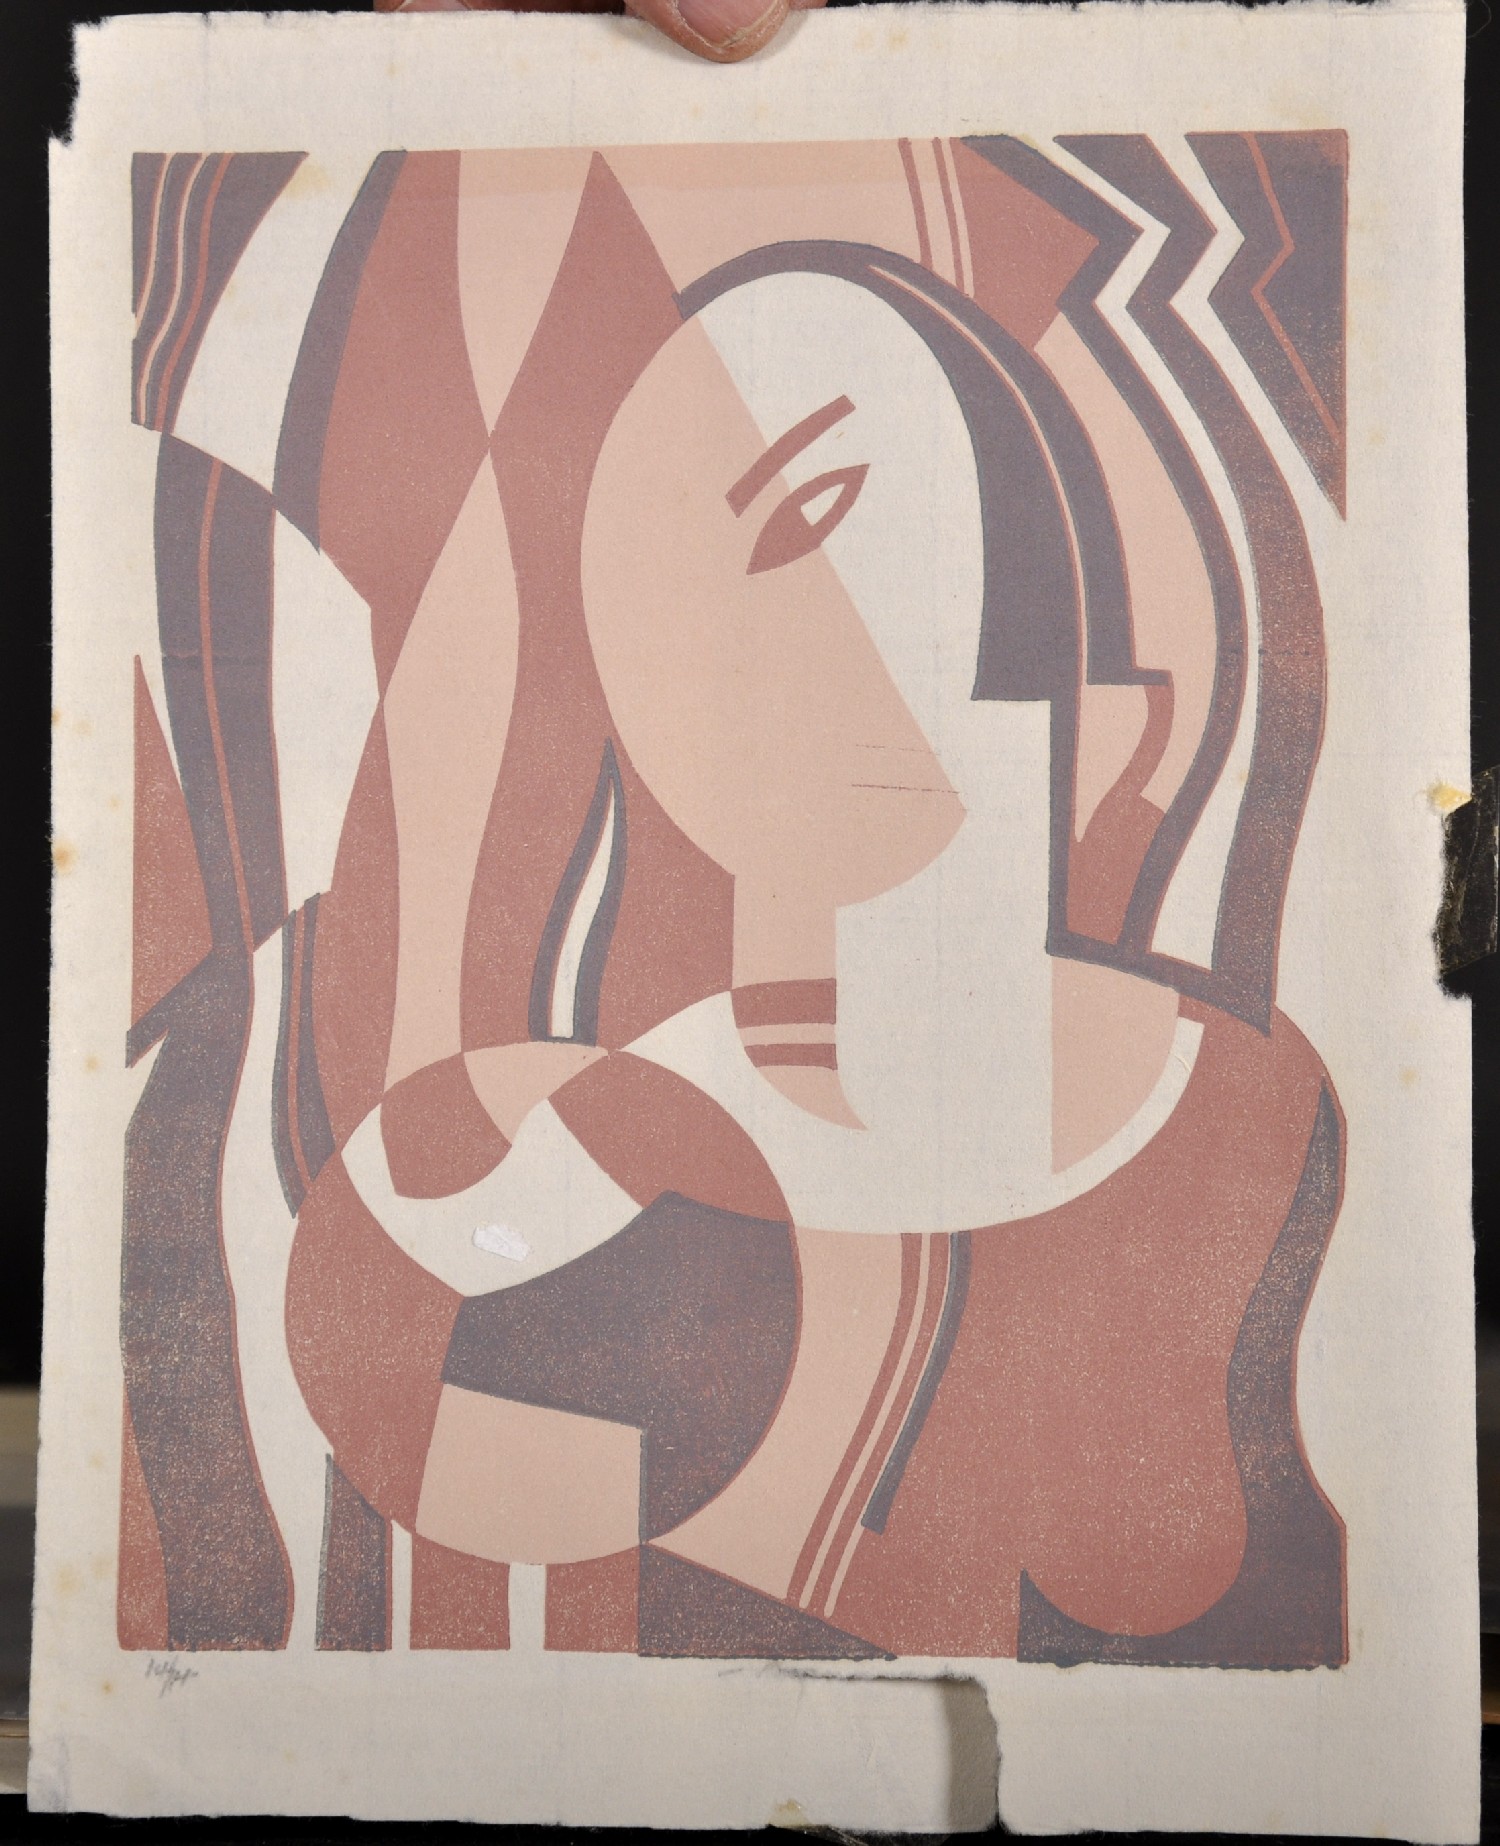 Leonard Beaumont (1891-1986) British. "Vanity", a Cubist form of a Figure, Linocut in Colours, - Image 2 of 4